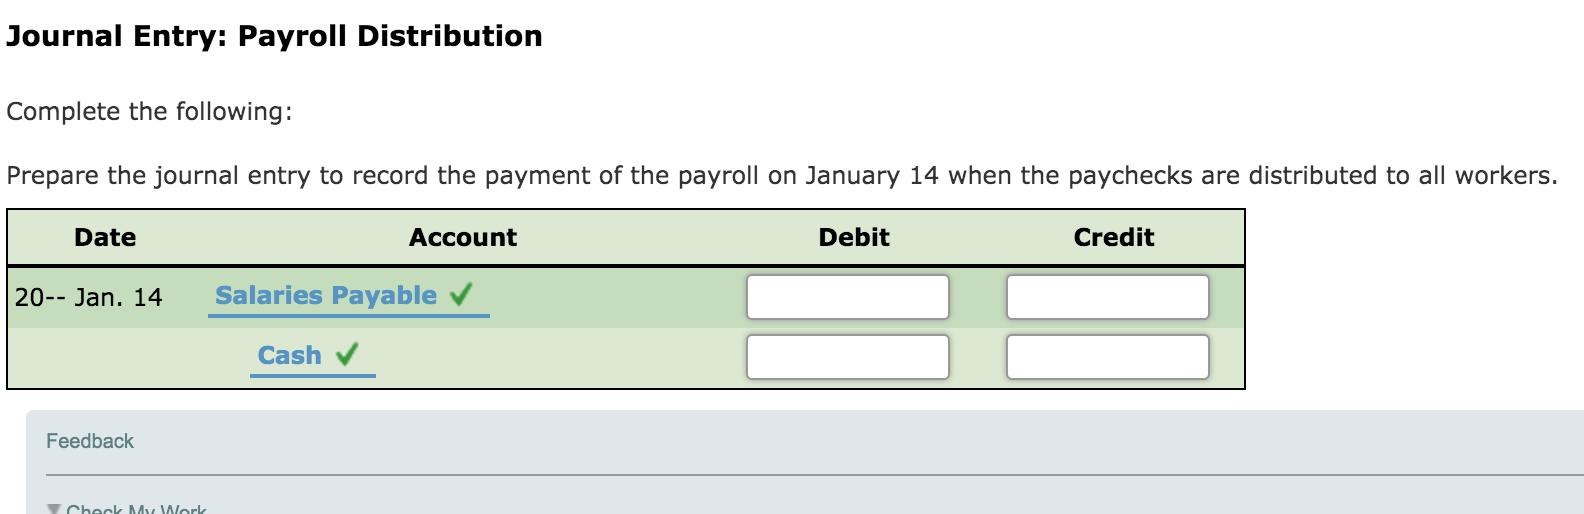 Journal Entry: Payroll Distribution Complete the following: Prepare the journal entry to record the payment of the payroll on